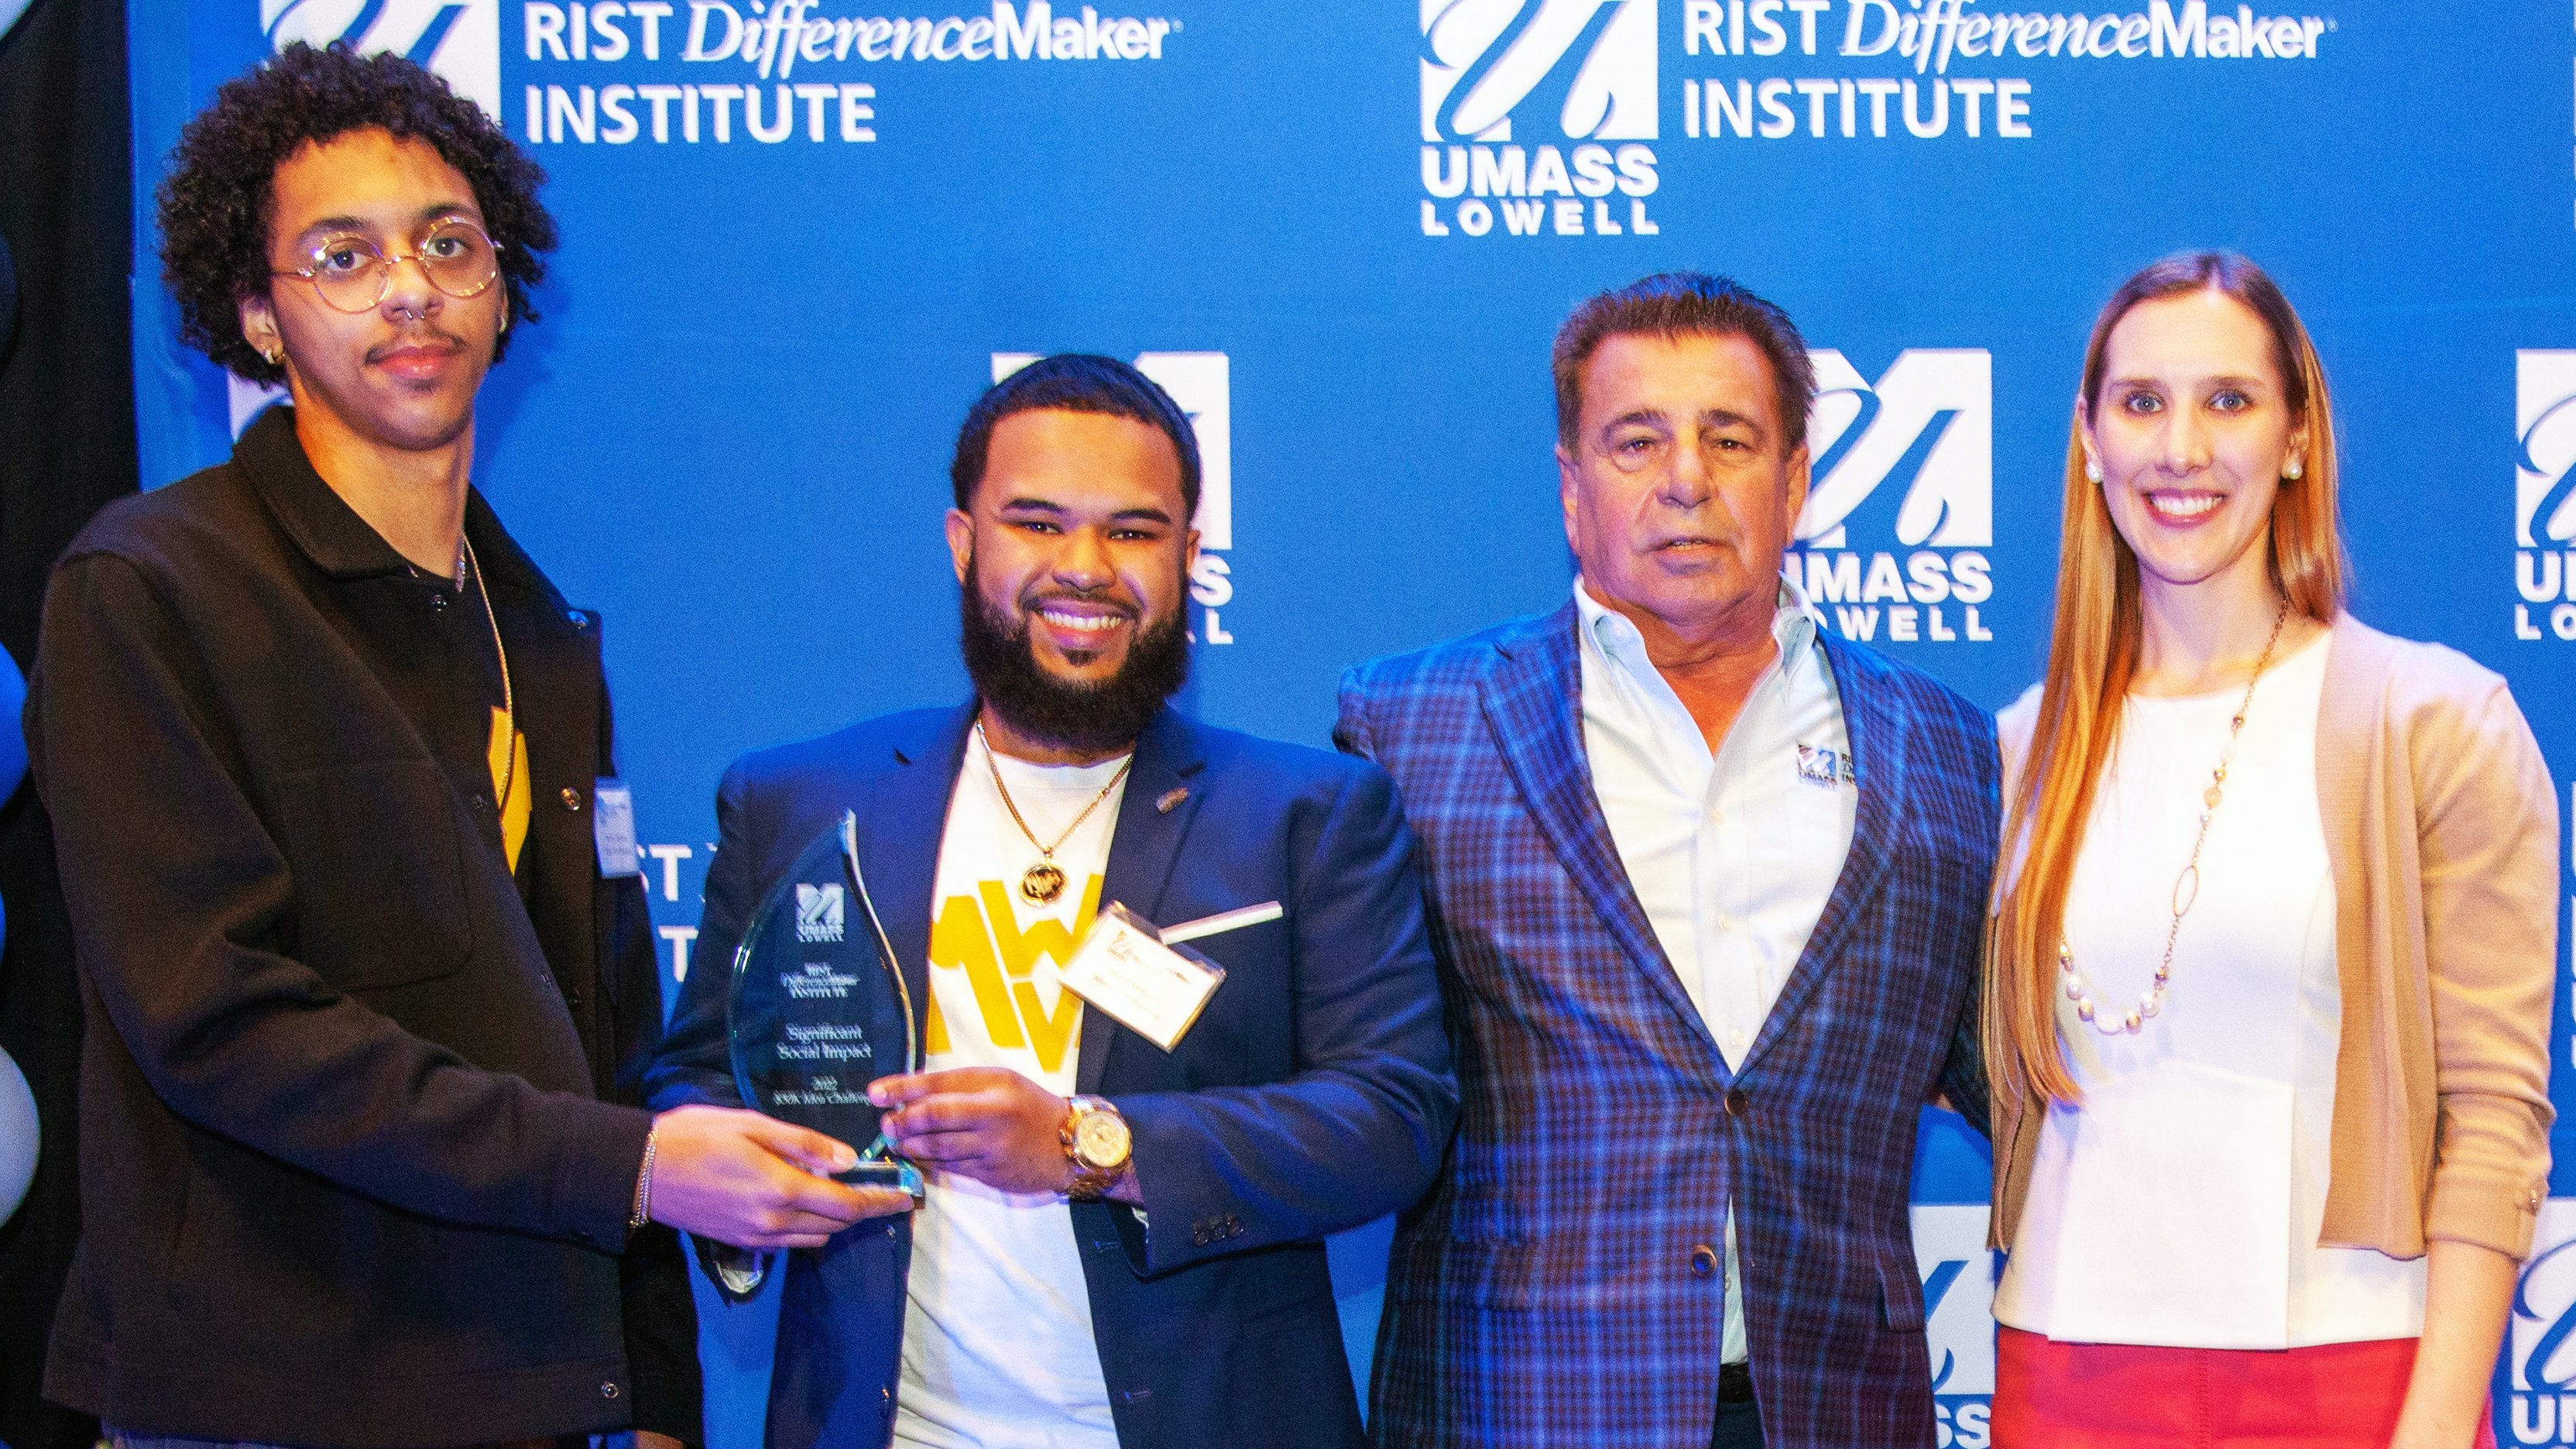 2 male students from the Minds With Purpose team holding an award pose with Brian Rist and Holly Lalos of Difference Makers against a blue UMass Lowell backdrop.